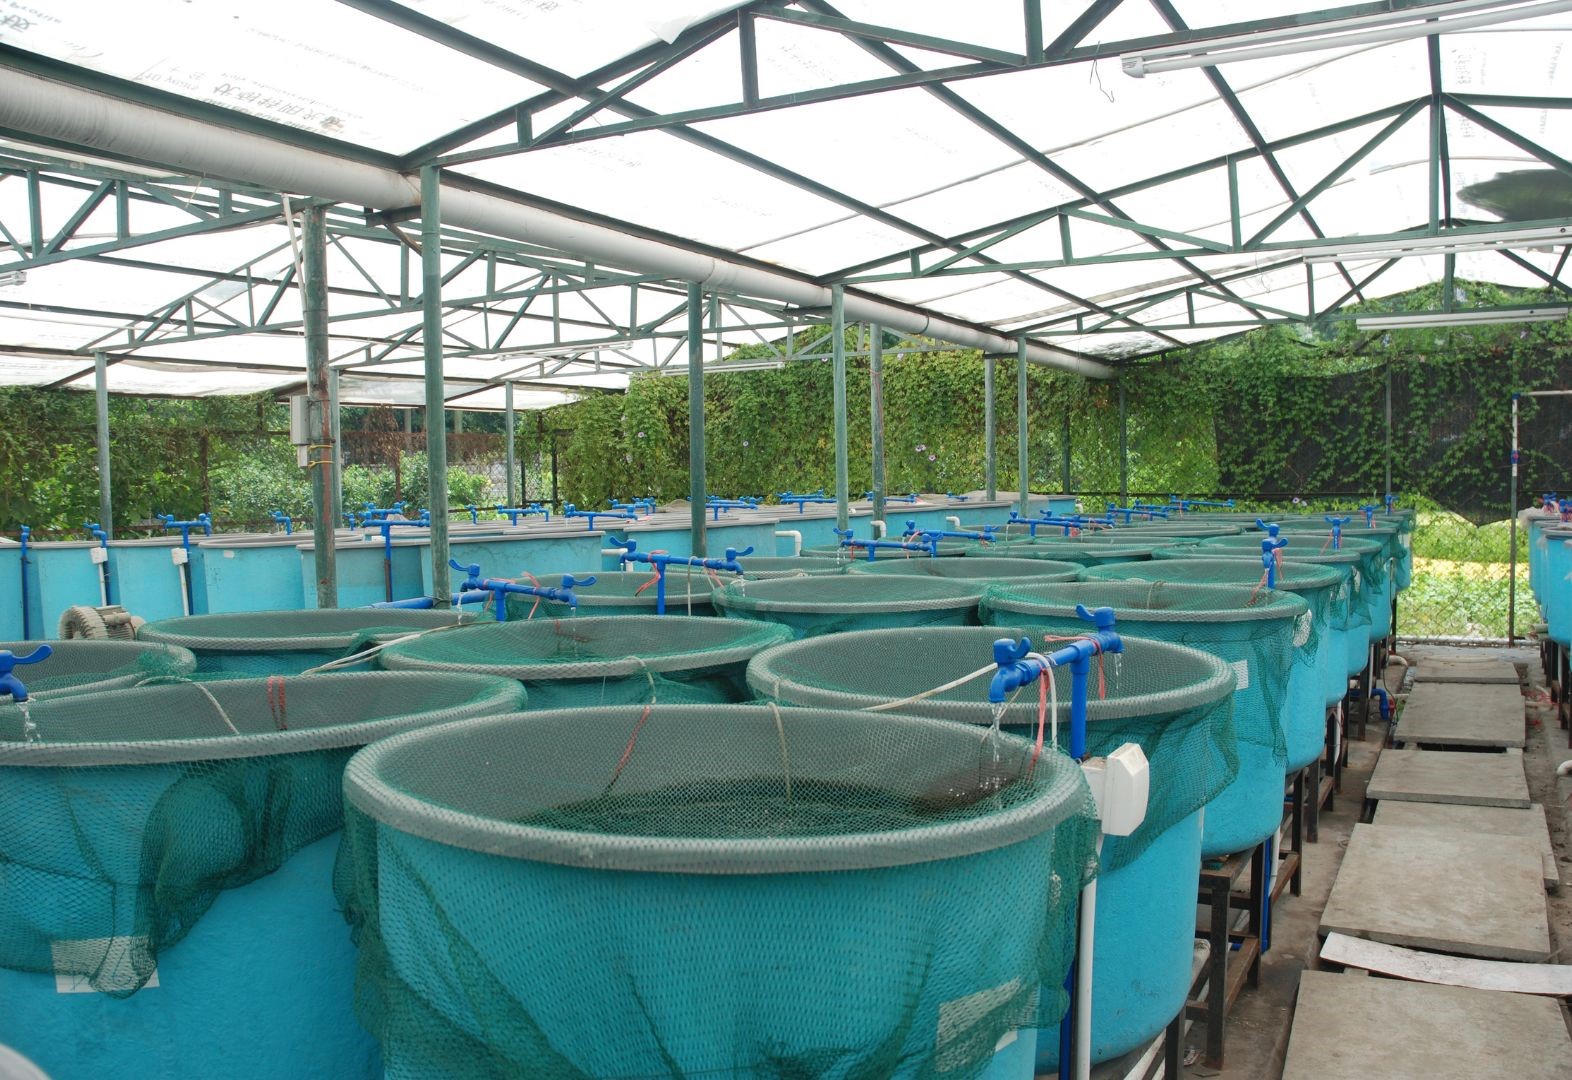 Innovative Climate-Smart Aquaculture Systems for Sustainable Fish Farming